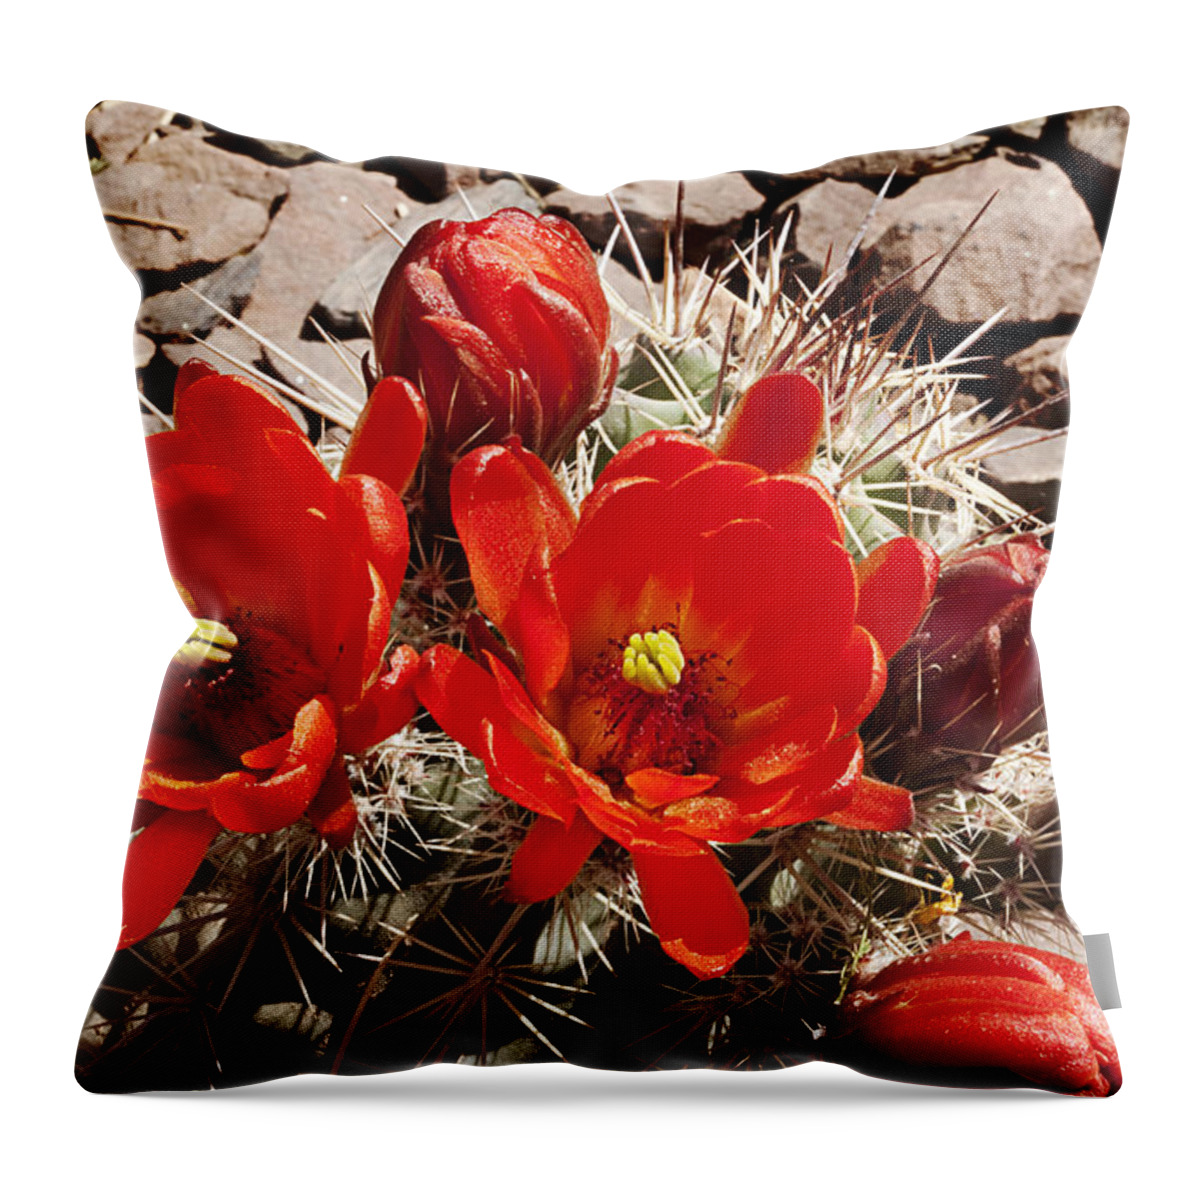 Blossoms Throw Pillow featuring the photograph Bright Orange Cactus Blossoms by Phyllis Denton